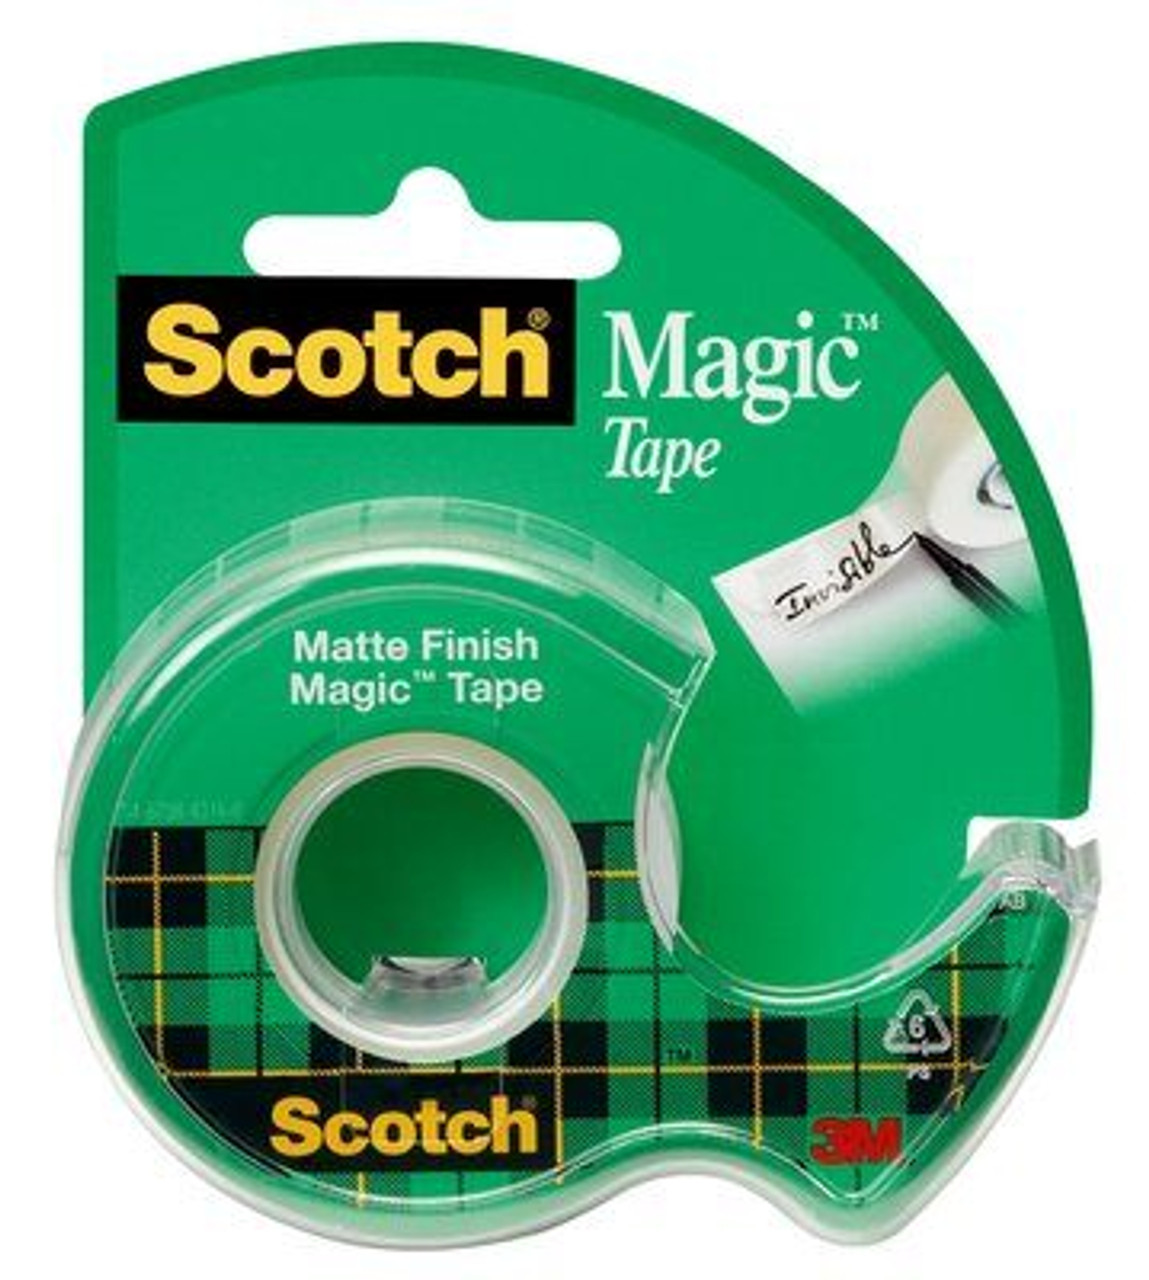 Scotch Wall-Safe Tape 500 in, Clear